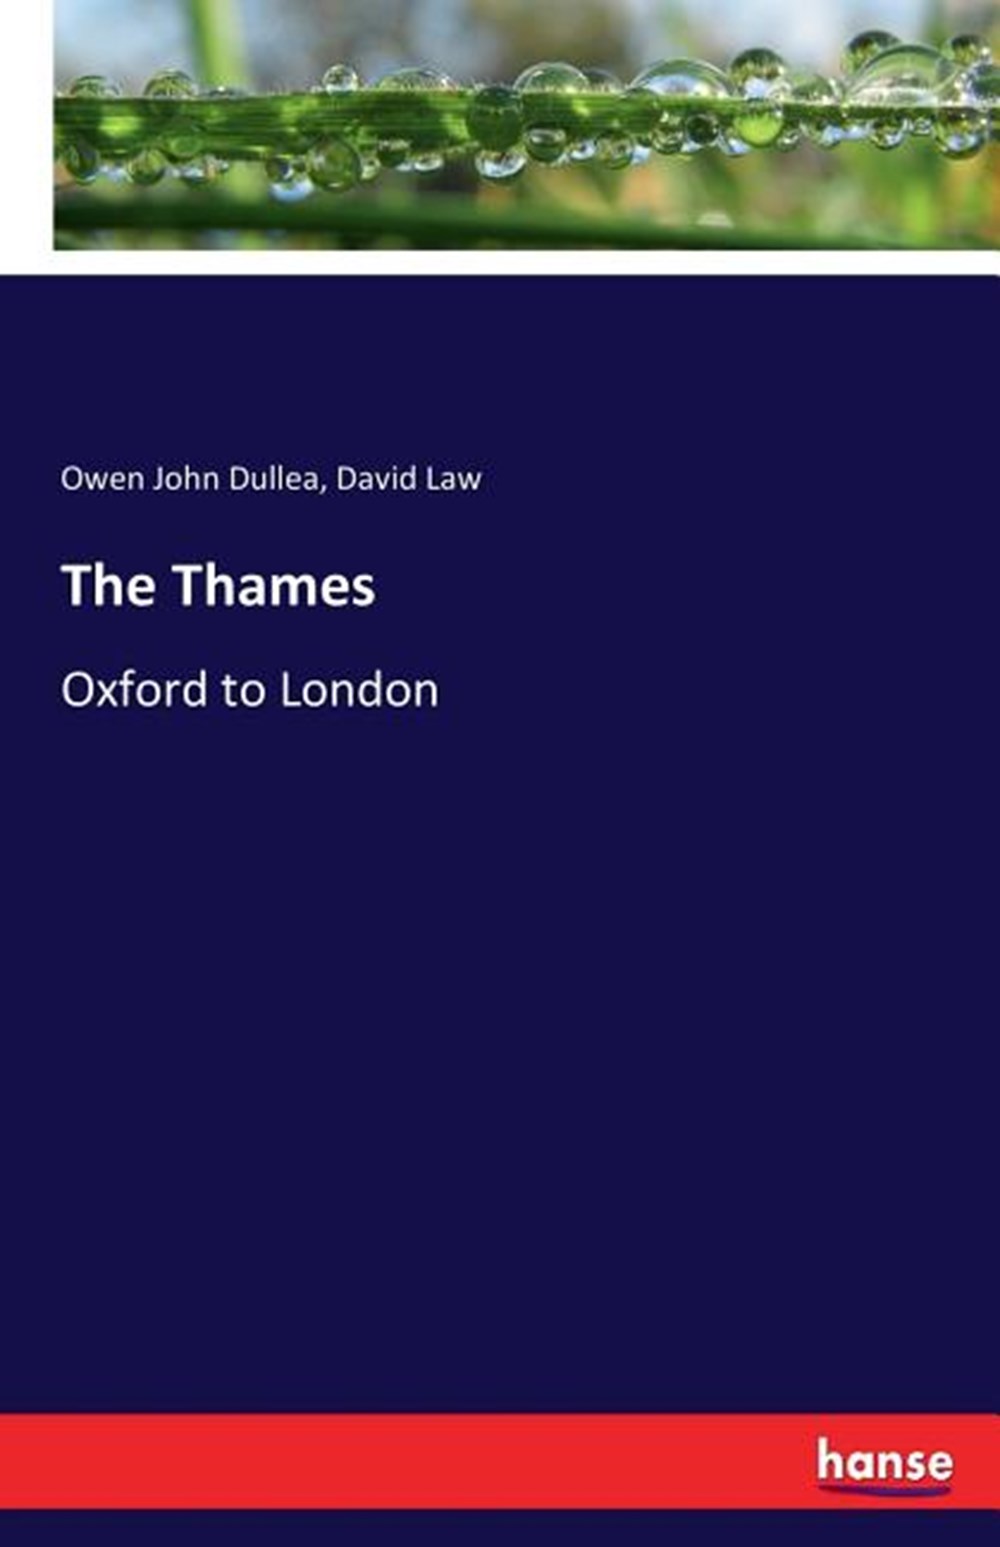 Thames: Oxford to London